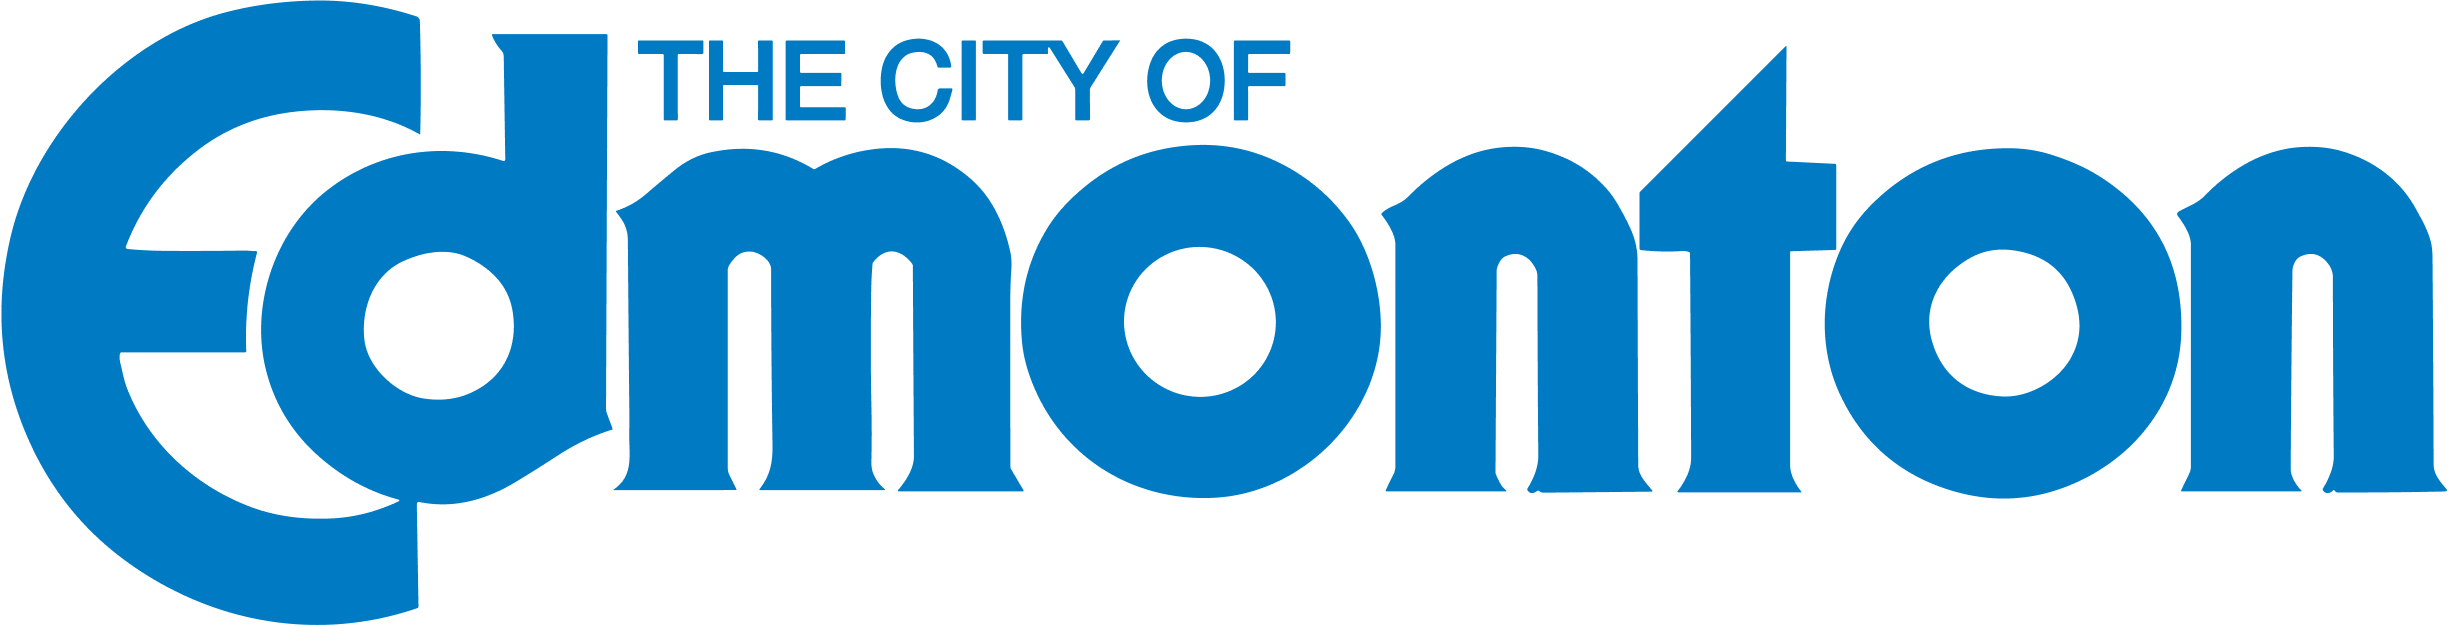 Logo for The City of Edmonton on a transparent background